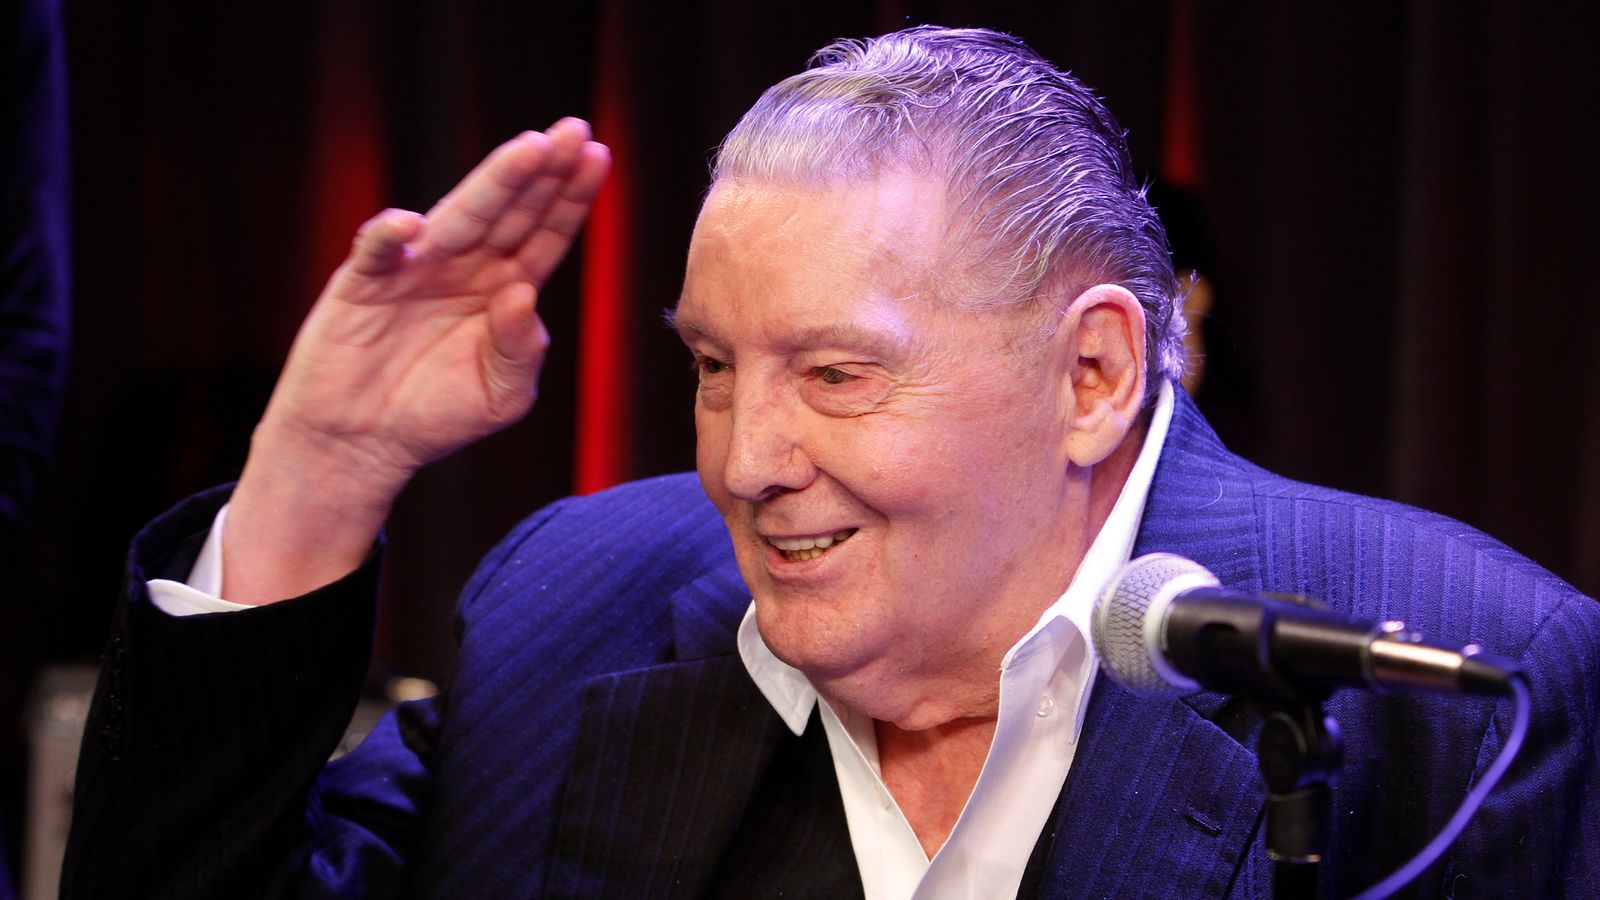 Jerry Lee Lewis: Rock 'n' roll star and Great Balls of Fire singer dies aged 87